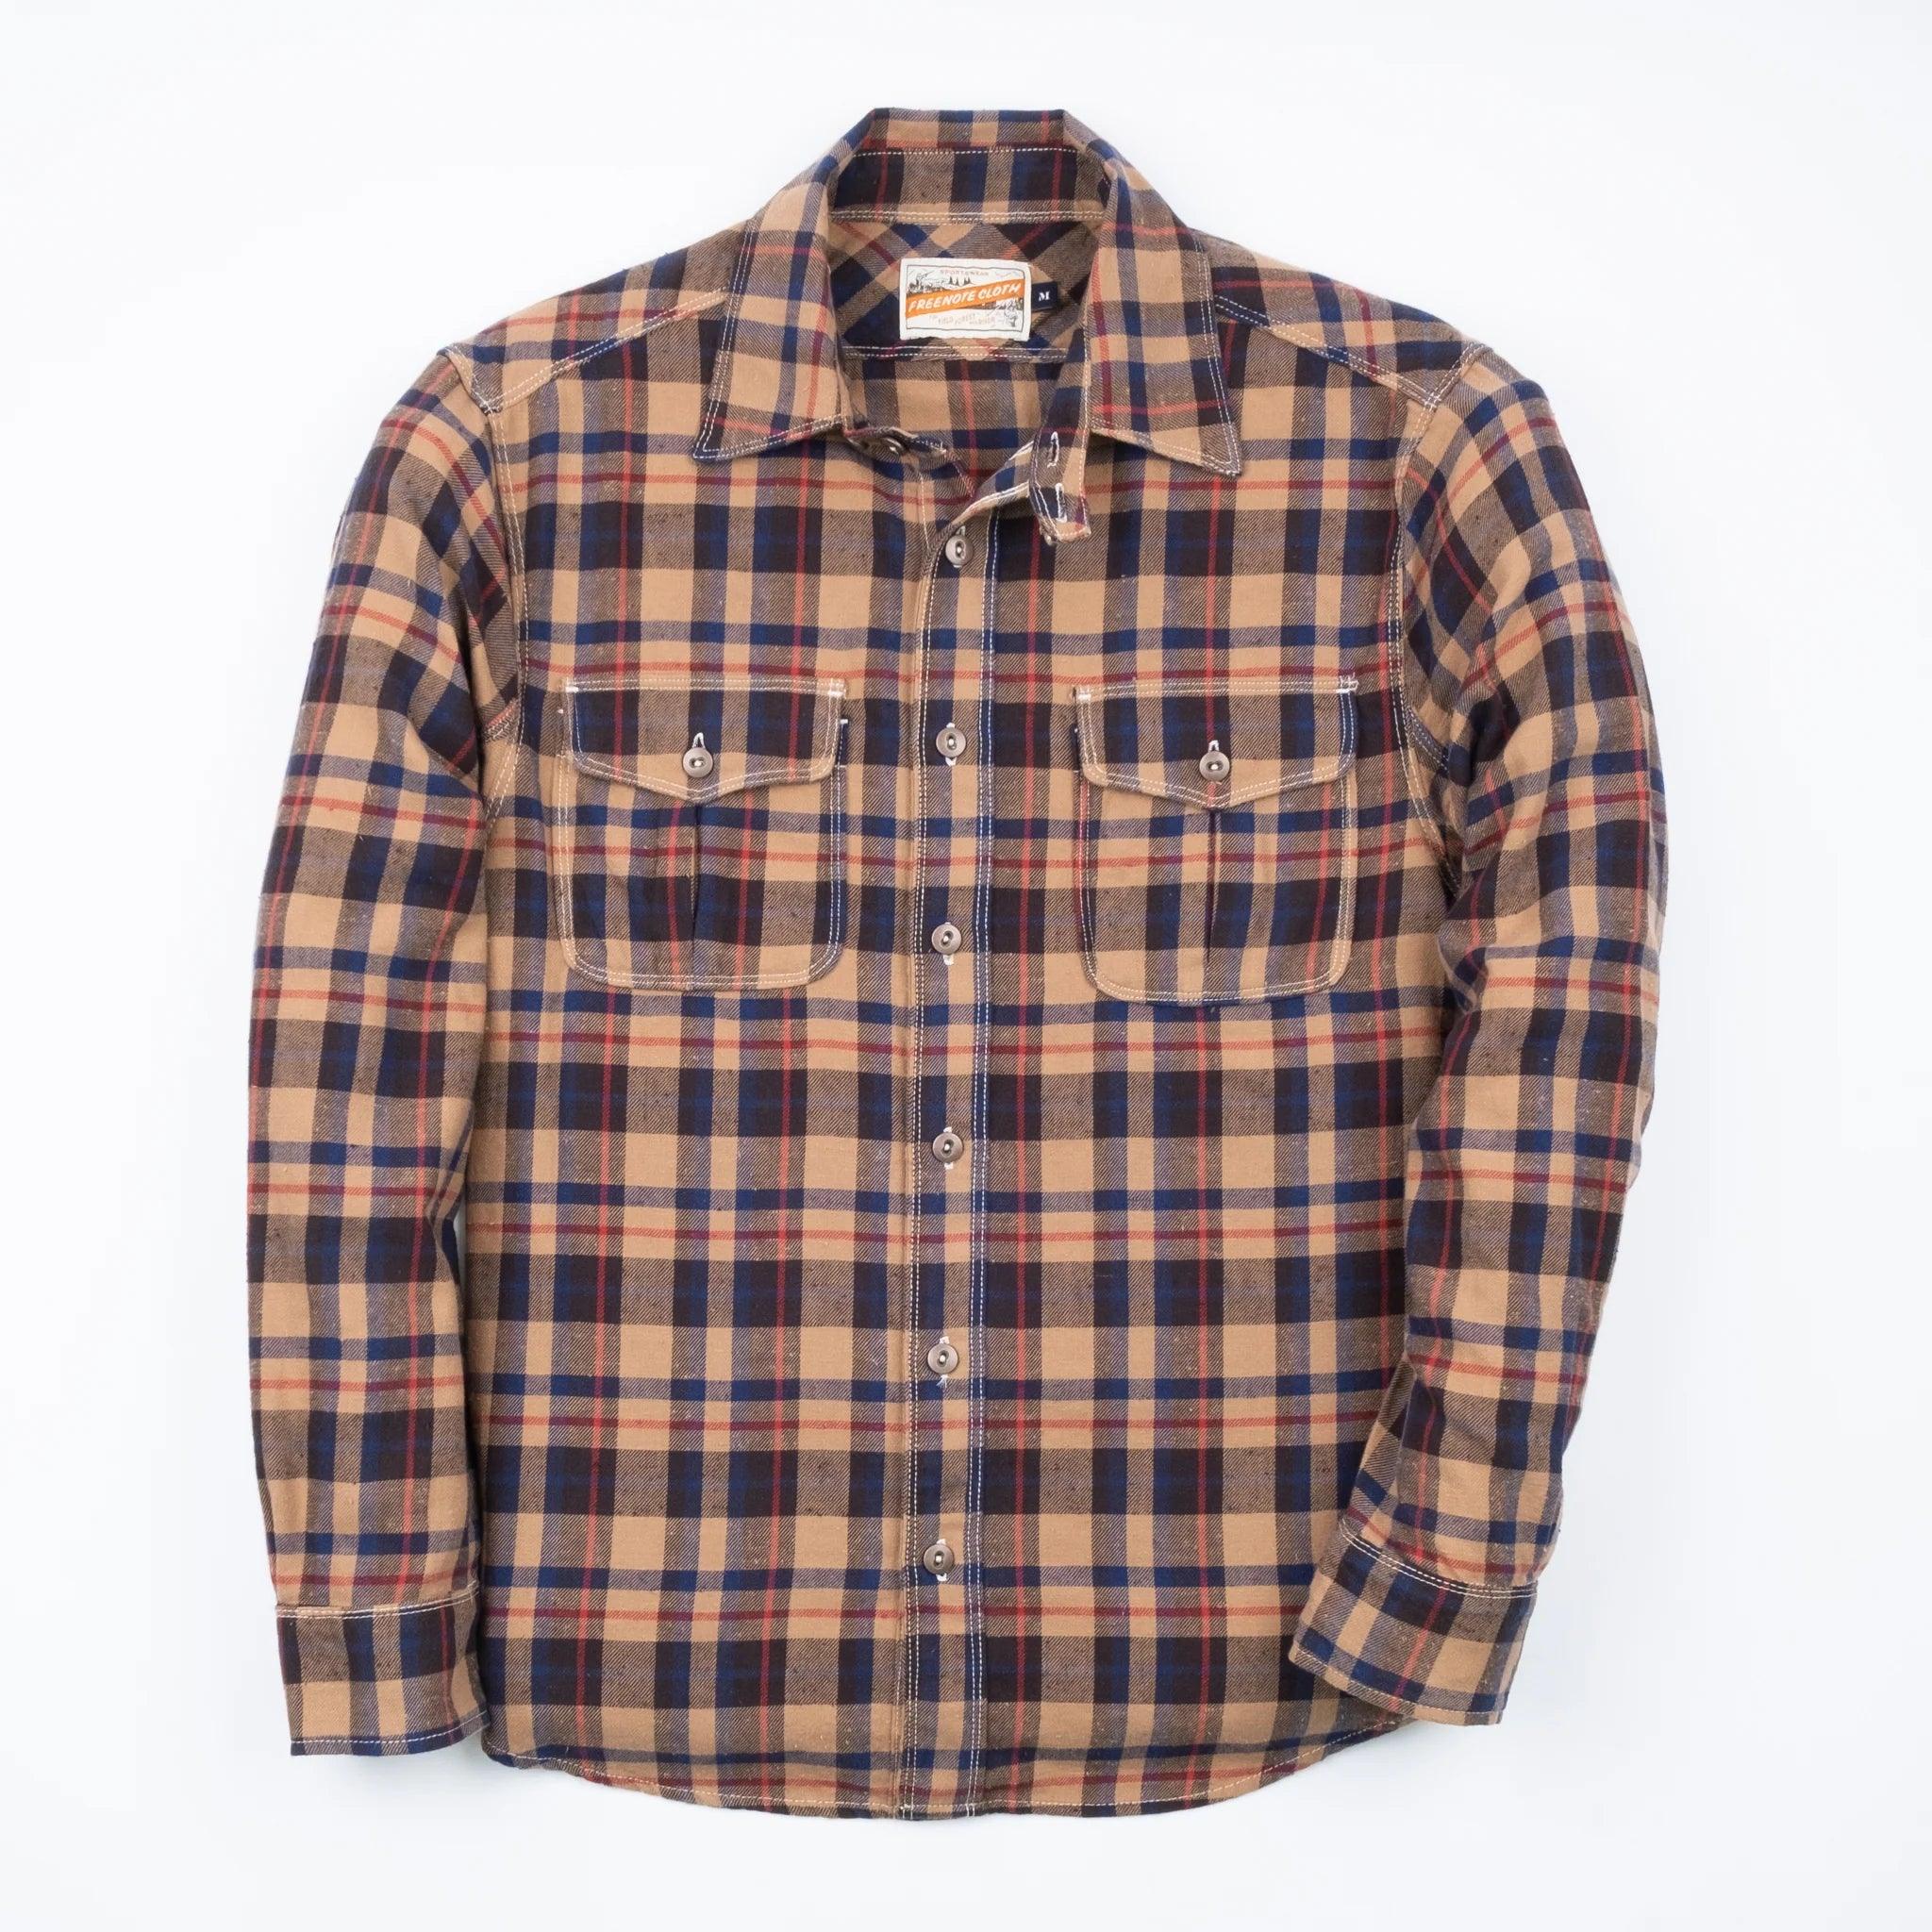 Currant Shirt - Brown Twill - Guilty Party